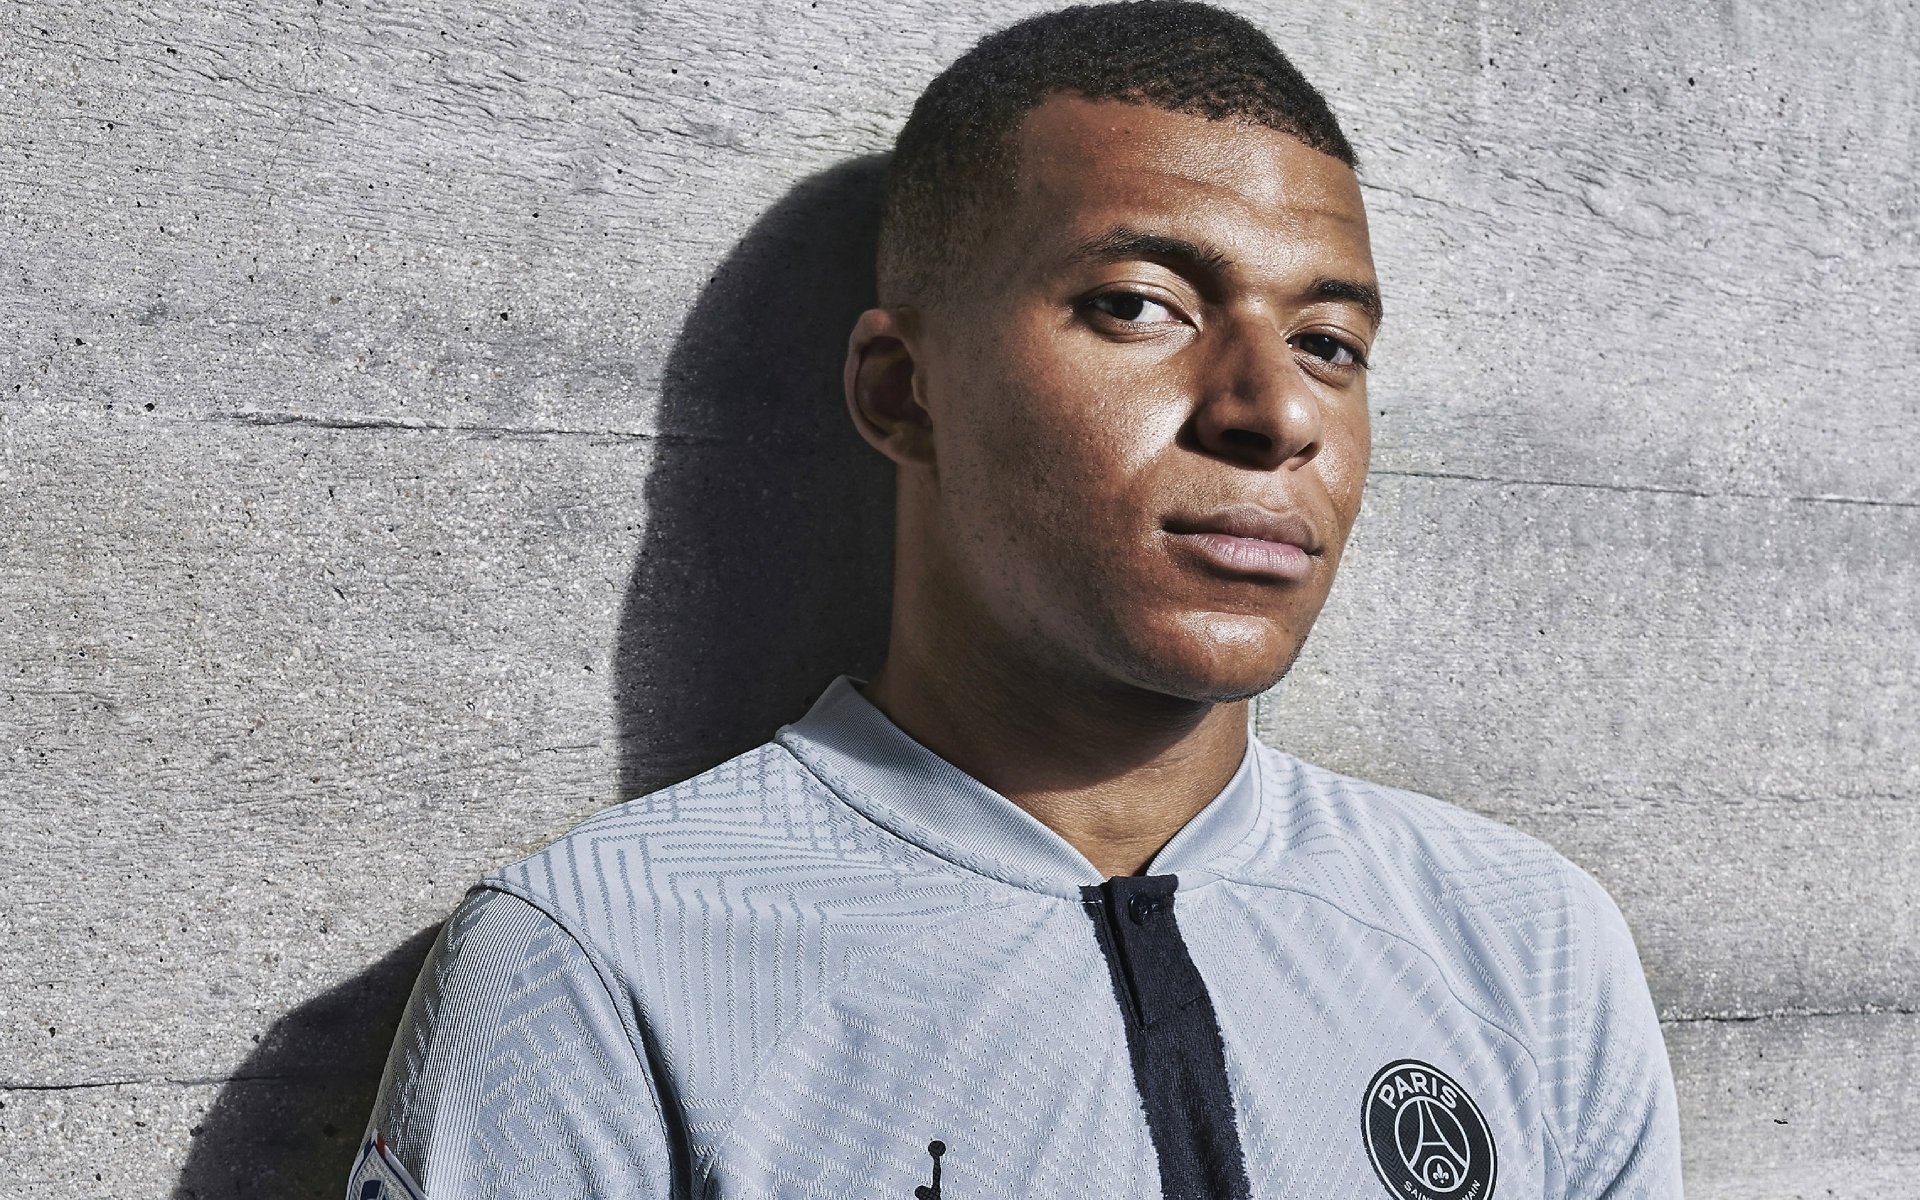 100+ Kylian Mbappé HD Wallpapers and Backgrounds